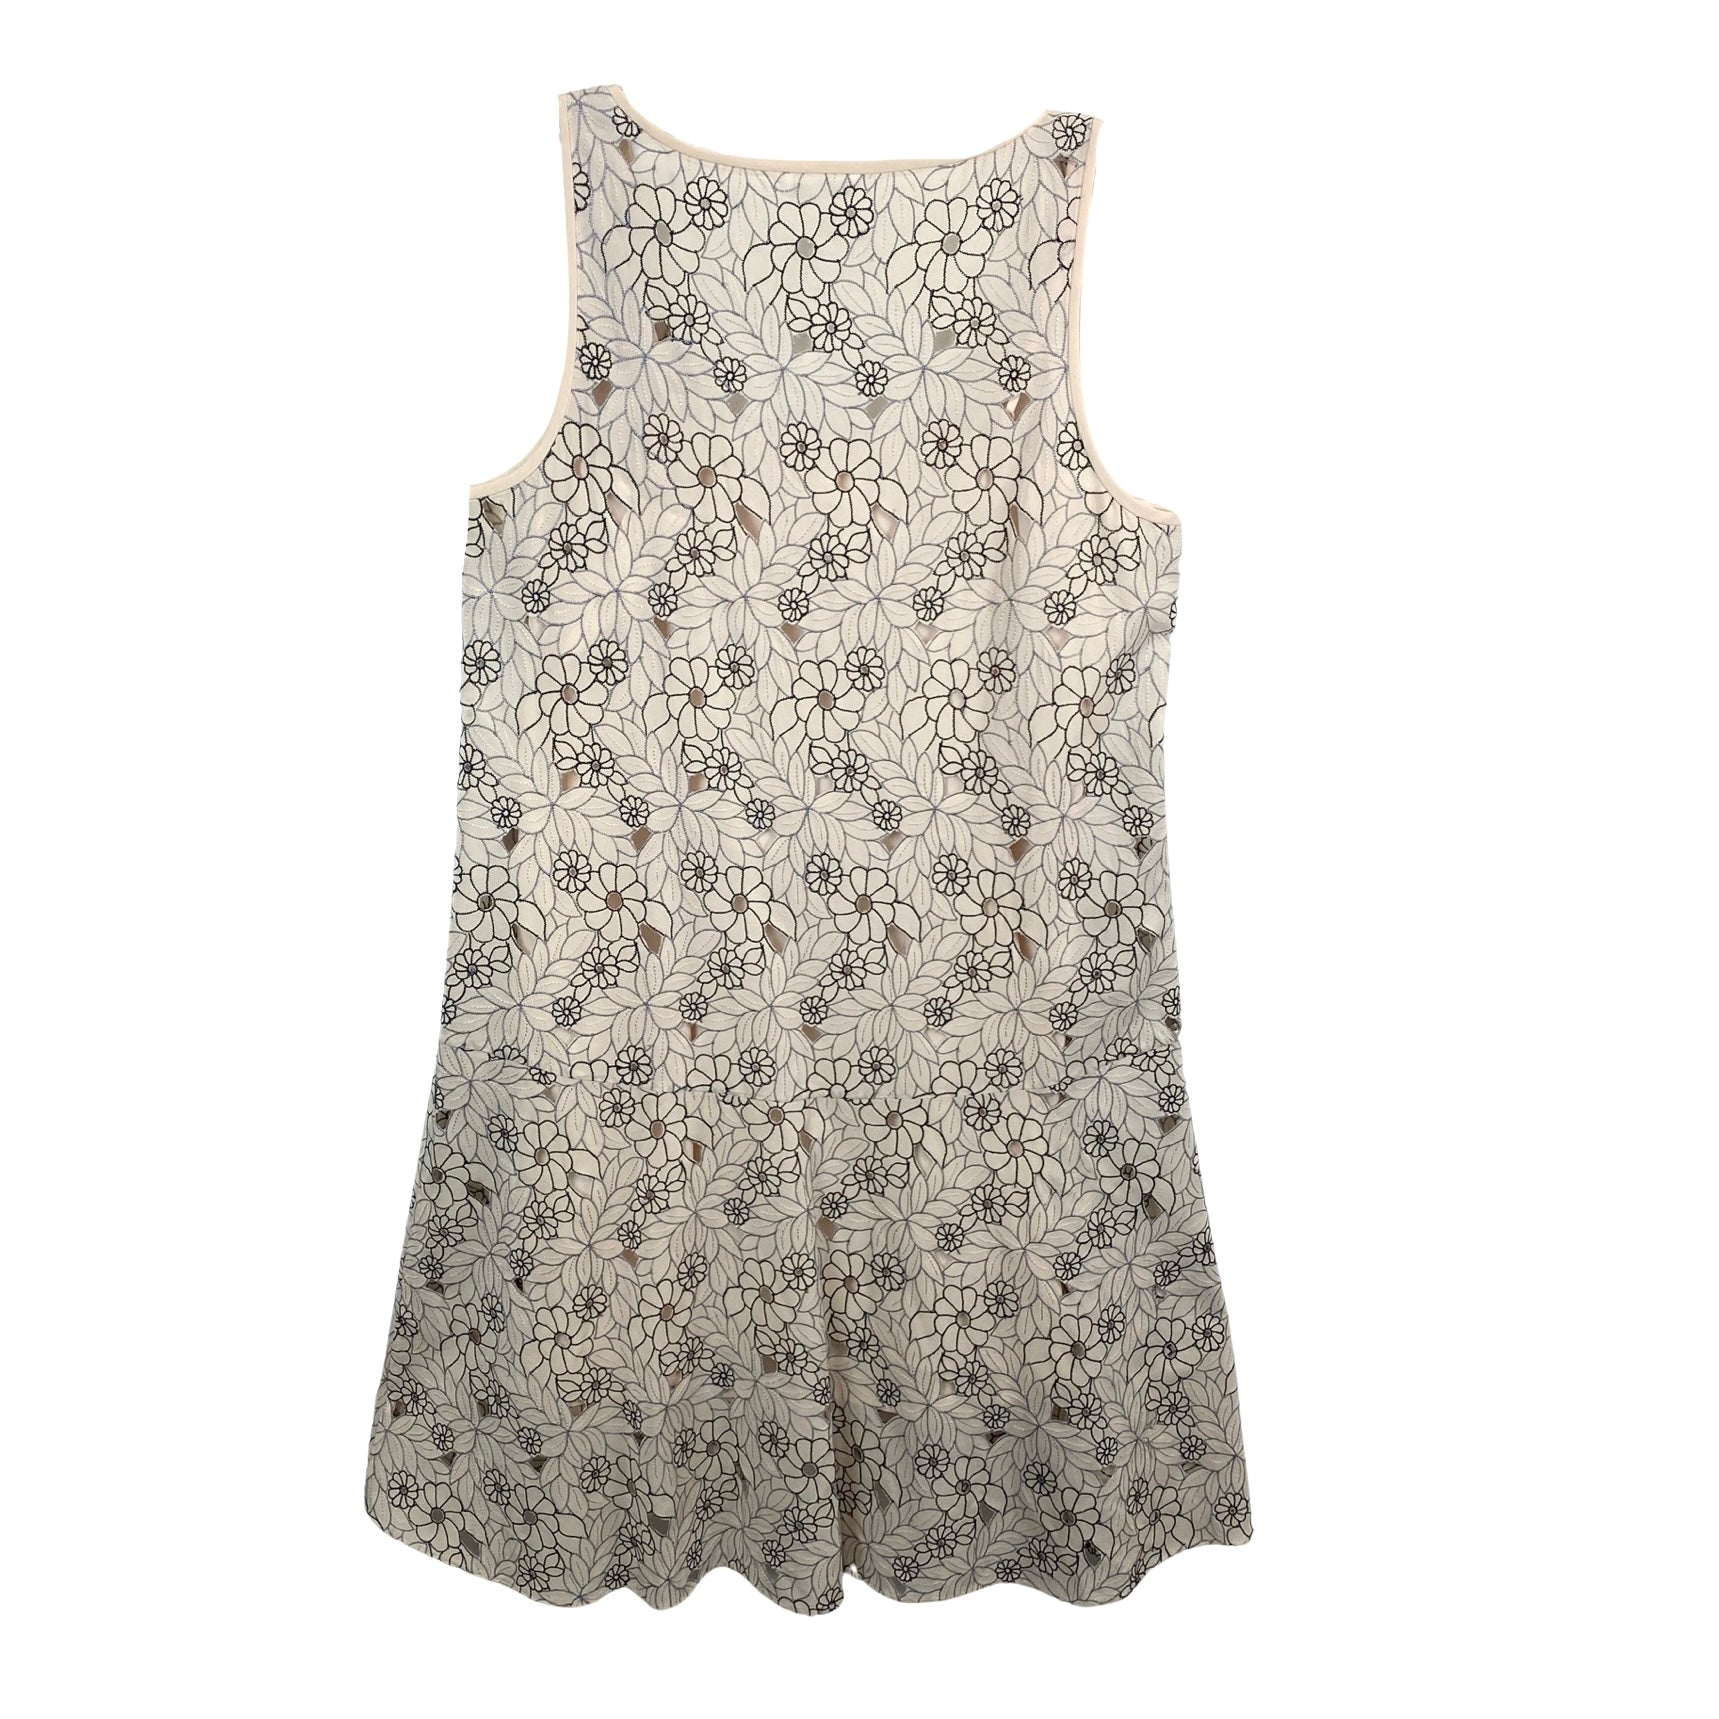 Club Monaco Floral Embroidered Lace Dress